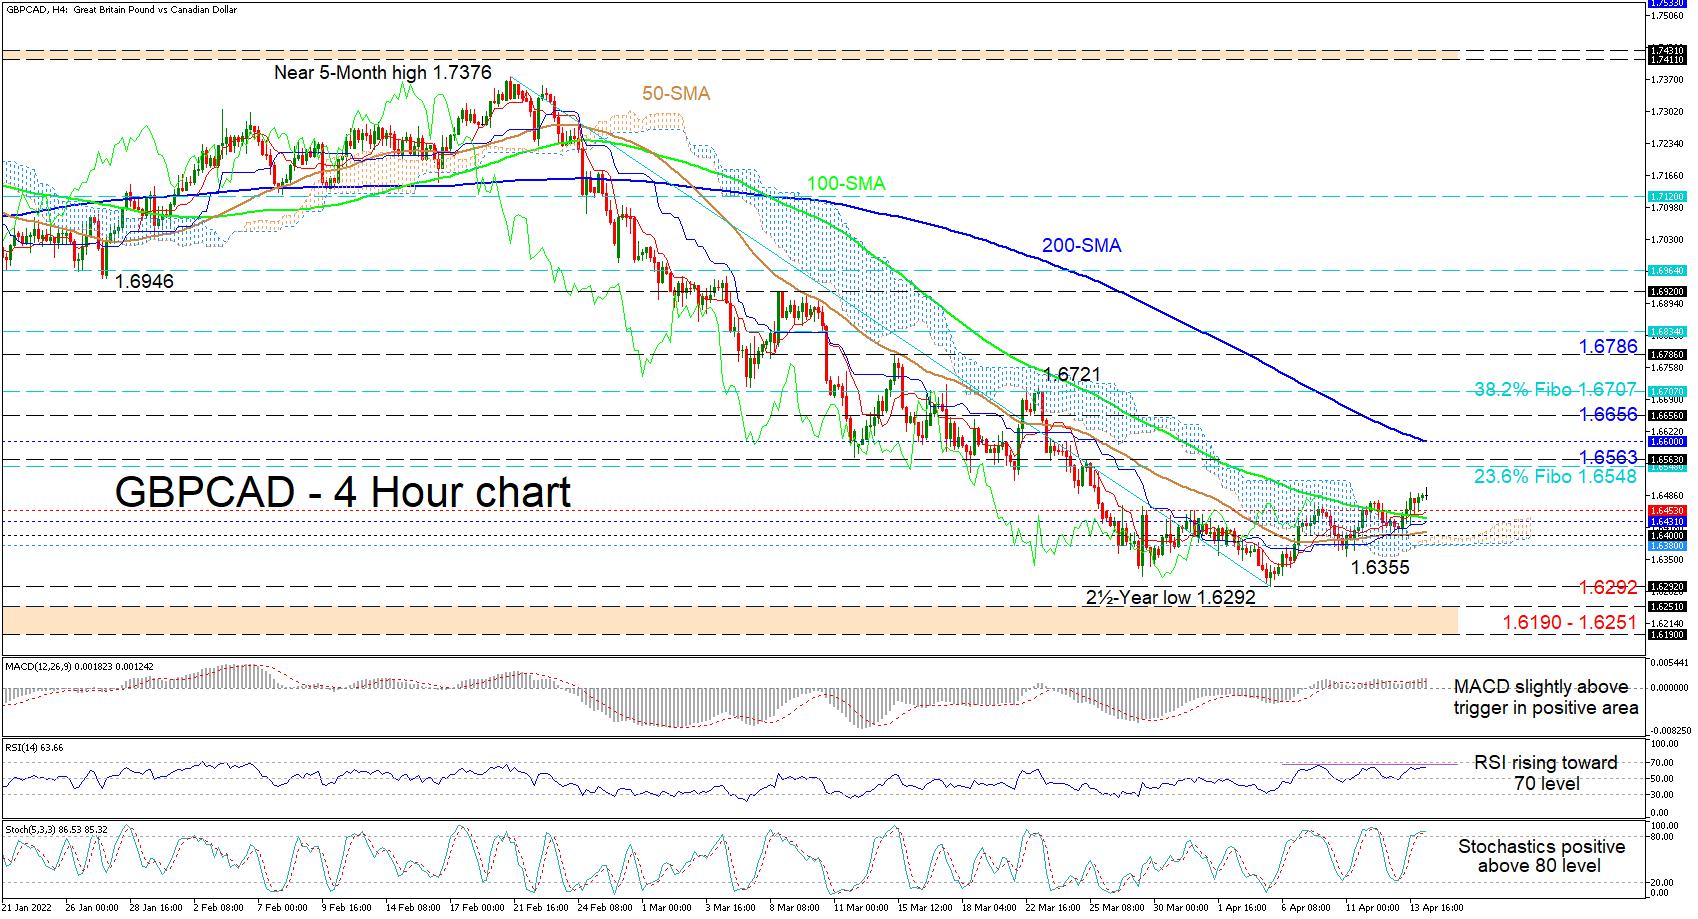 Technical analysis: GBP/CAD creeps up, eyeing the falling 200 MA